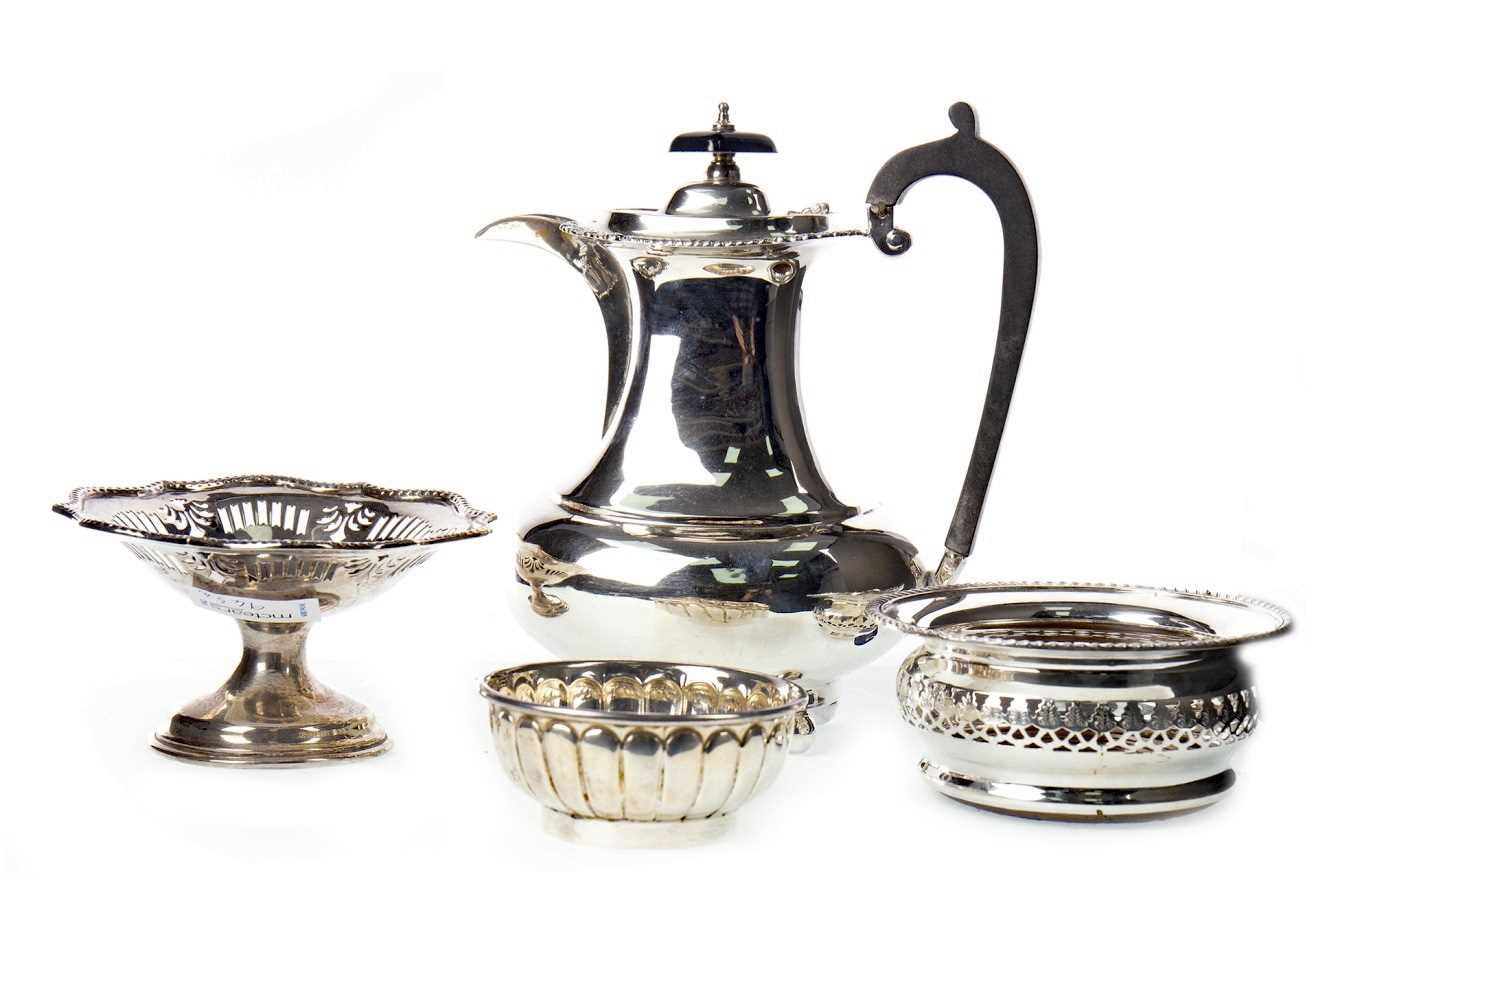 Lot 943 - EARLY 20TH CENTURY SILVER WATER JUG ALONG WITH A BONBON DISH, BOWL AND WINE SLIDE